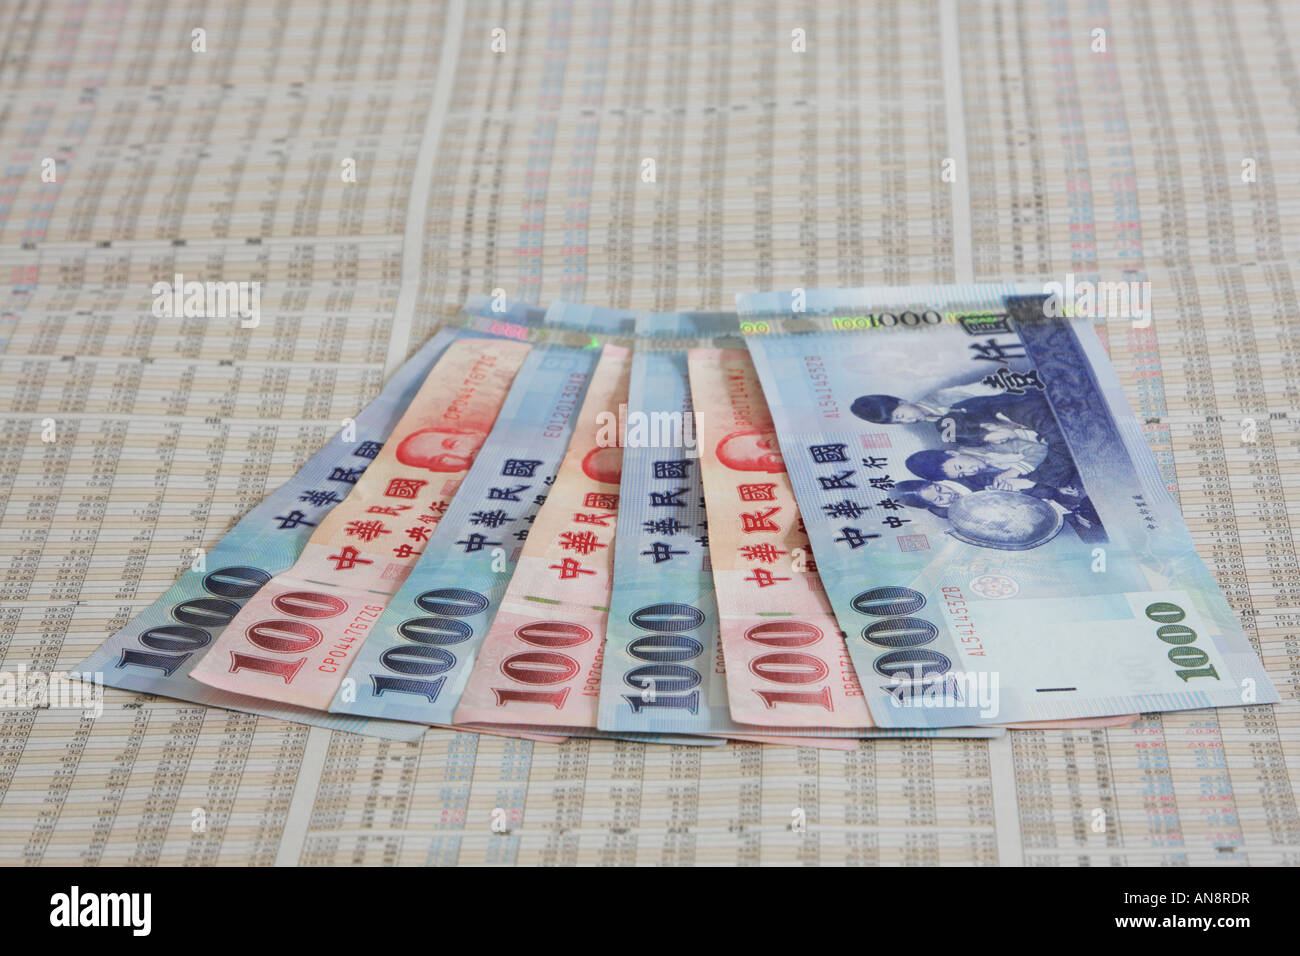 Taiwanese Dollars On Stock Prices In Chinese Newspaper Stock Photo